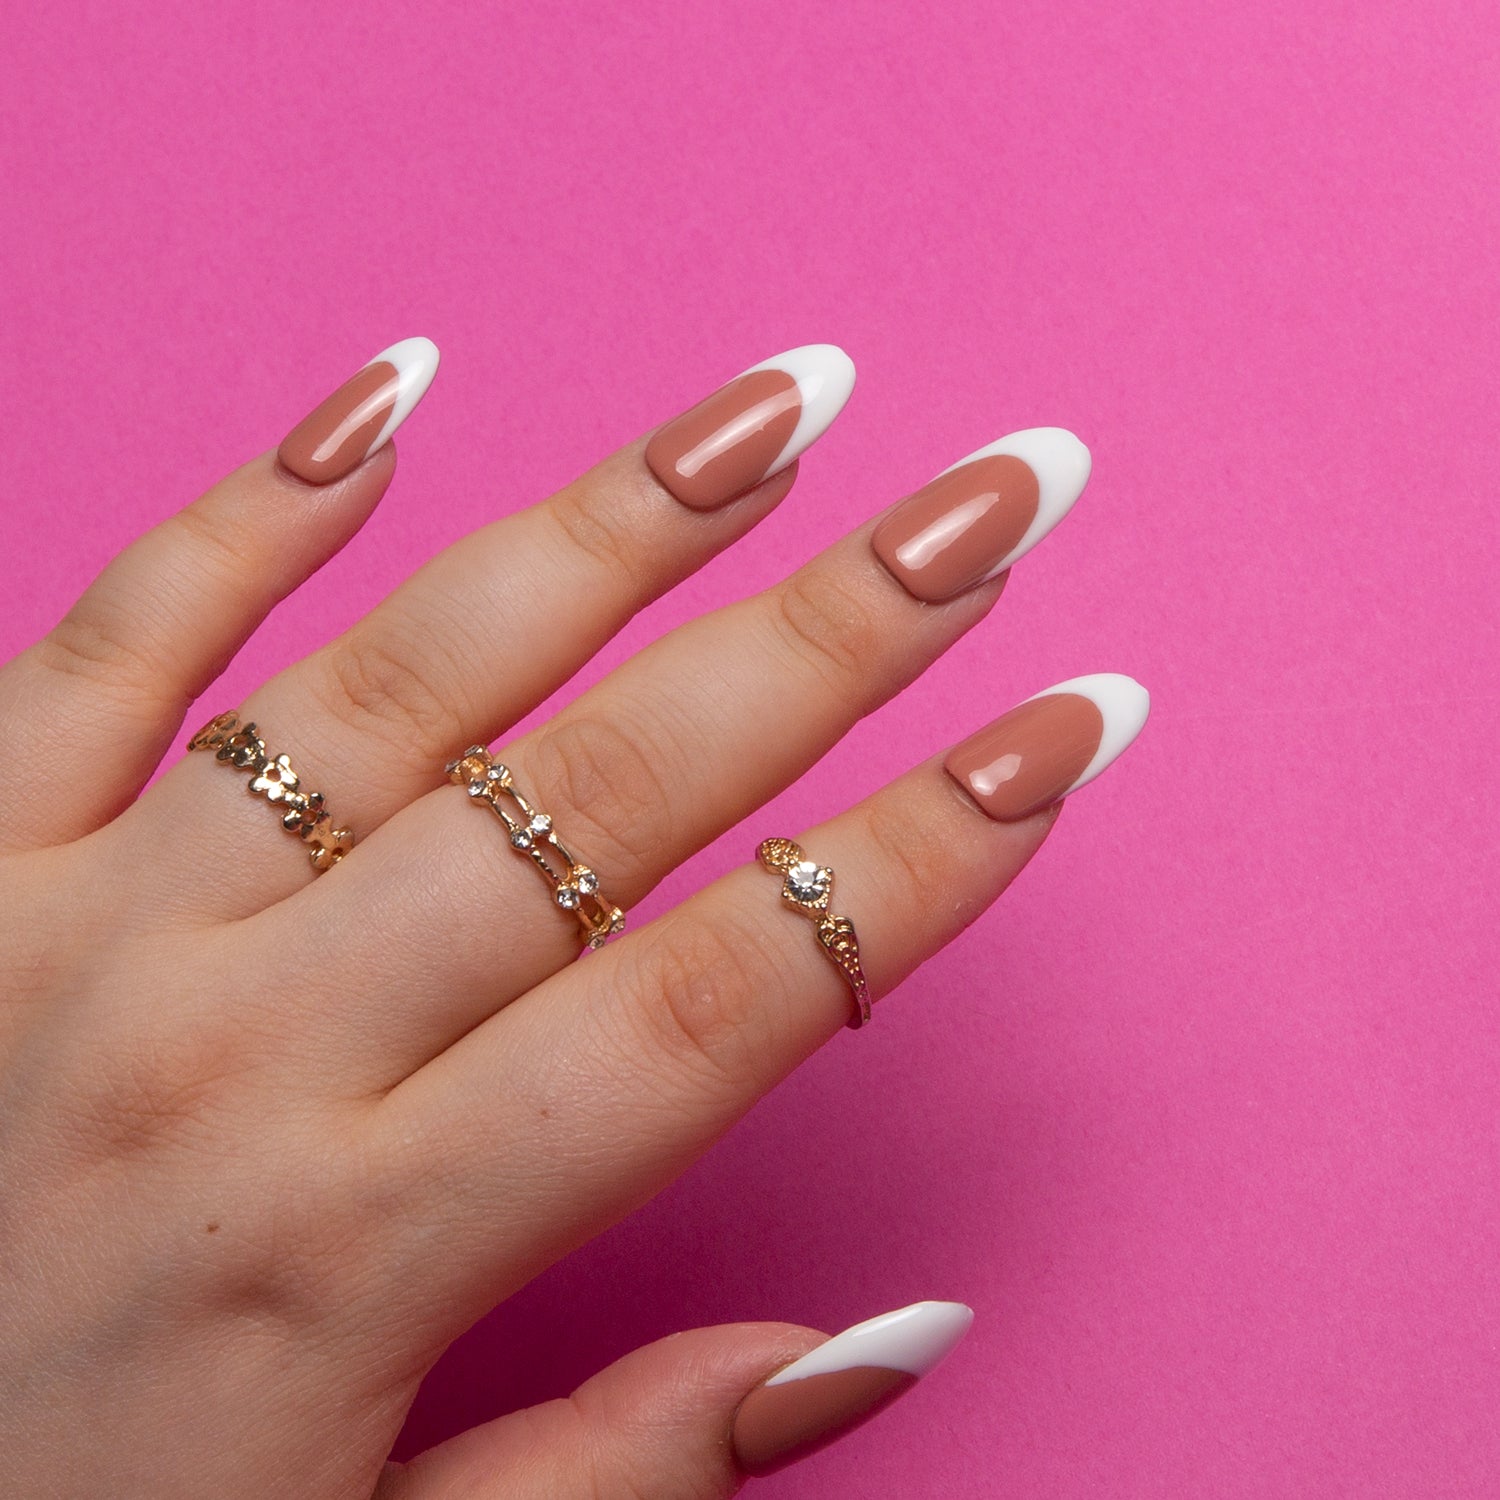 Hand with long round Coffee Latte French Tip press-on nails, featuring a rich brown base and white tips, adorned with gold rings against a bright pink background.